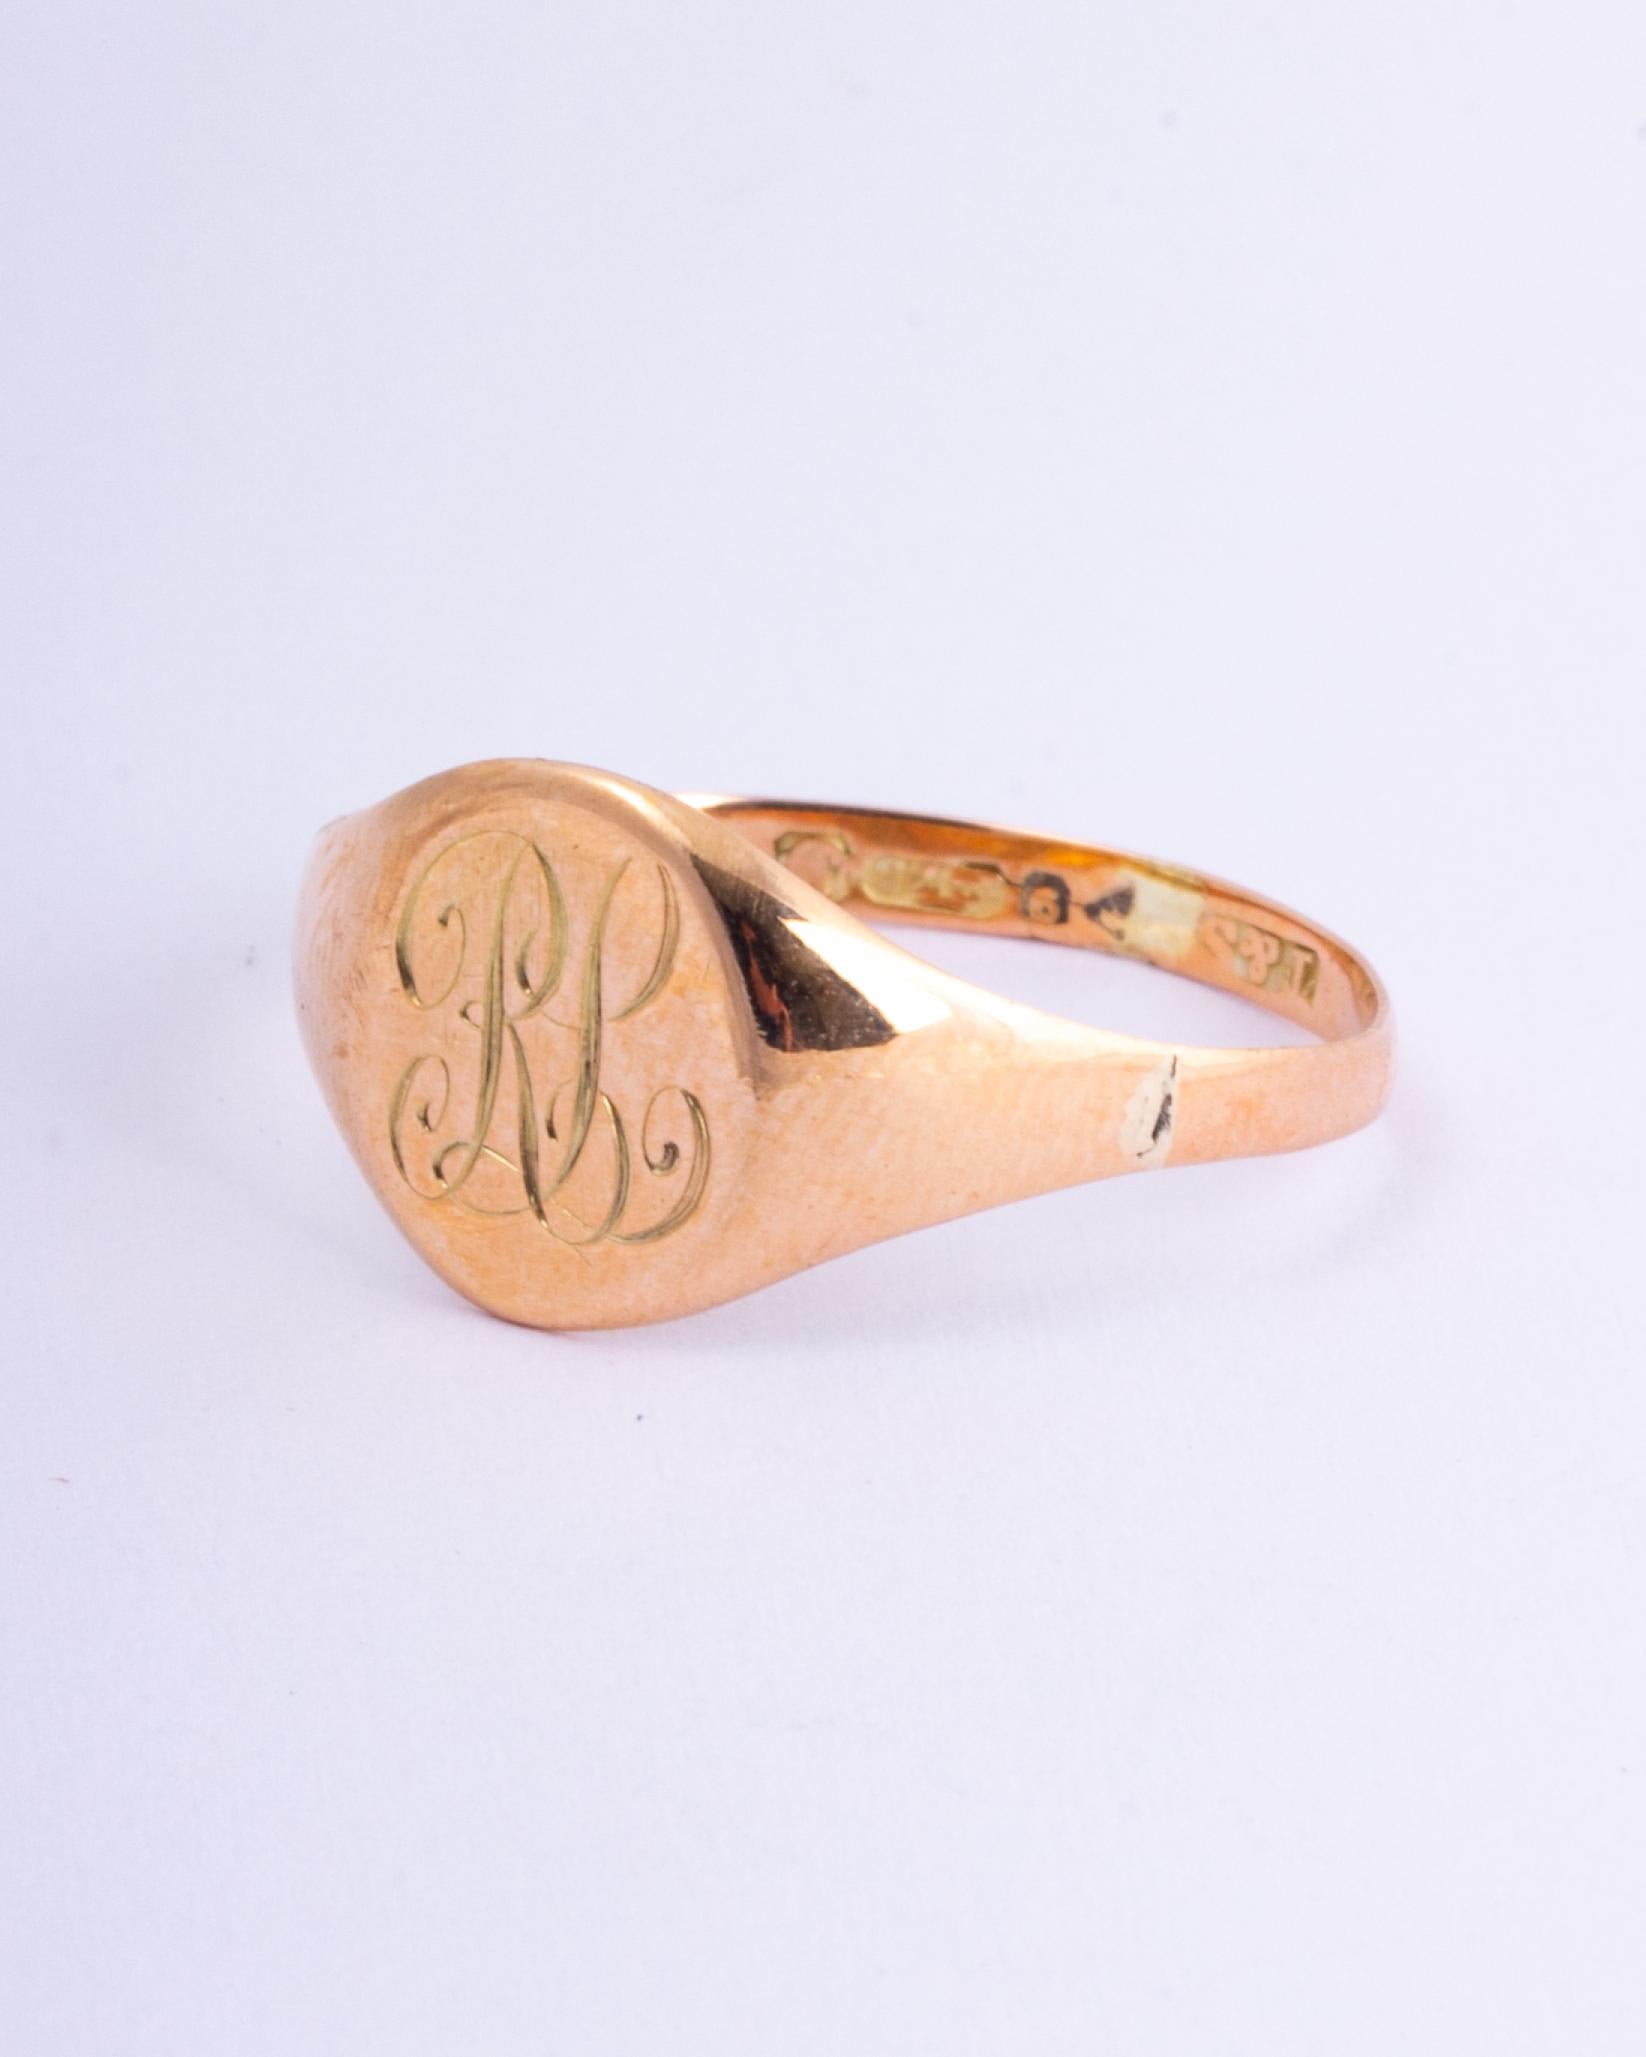 The fluid scroll font which reads 'RL' is finely engraved onto the face of this ring. The shoulders are smooth and carry on down into a plain band modelled in 9ct gold. 

RIng Size: T or 9 1/2
Widest Part: 11mm 

Weight: 1.1g